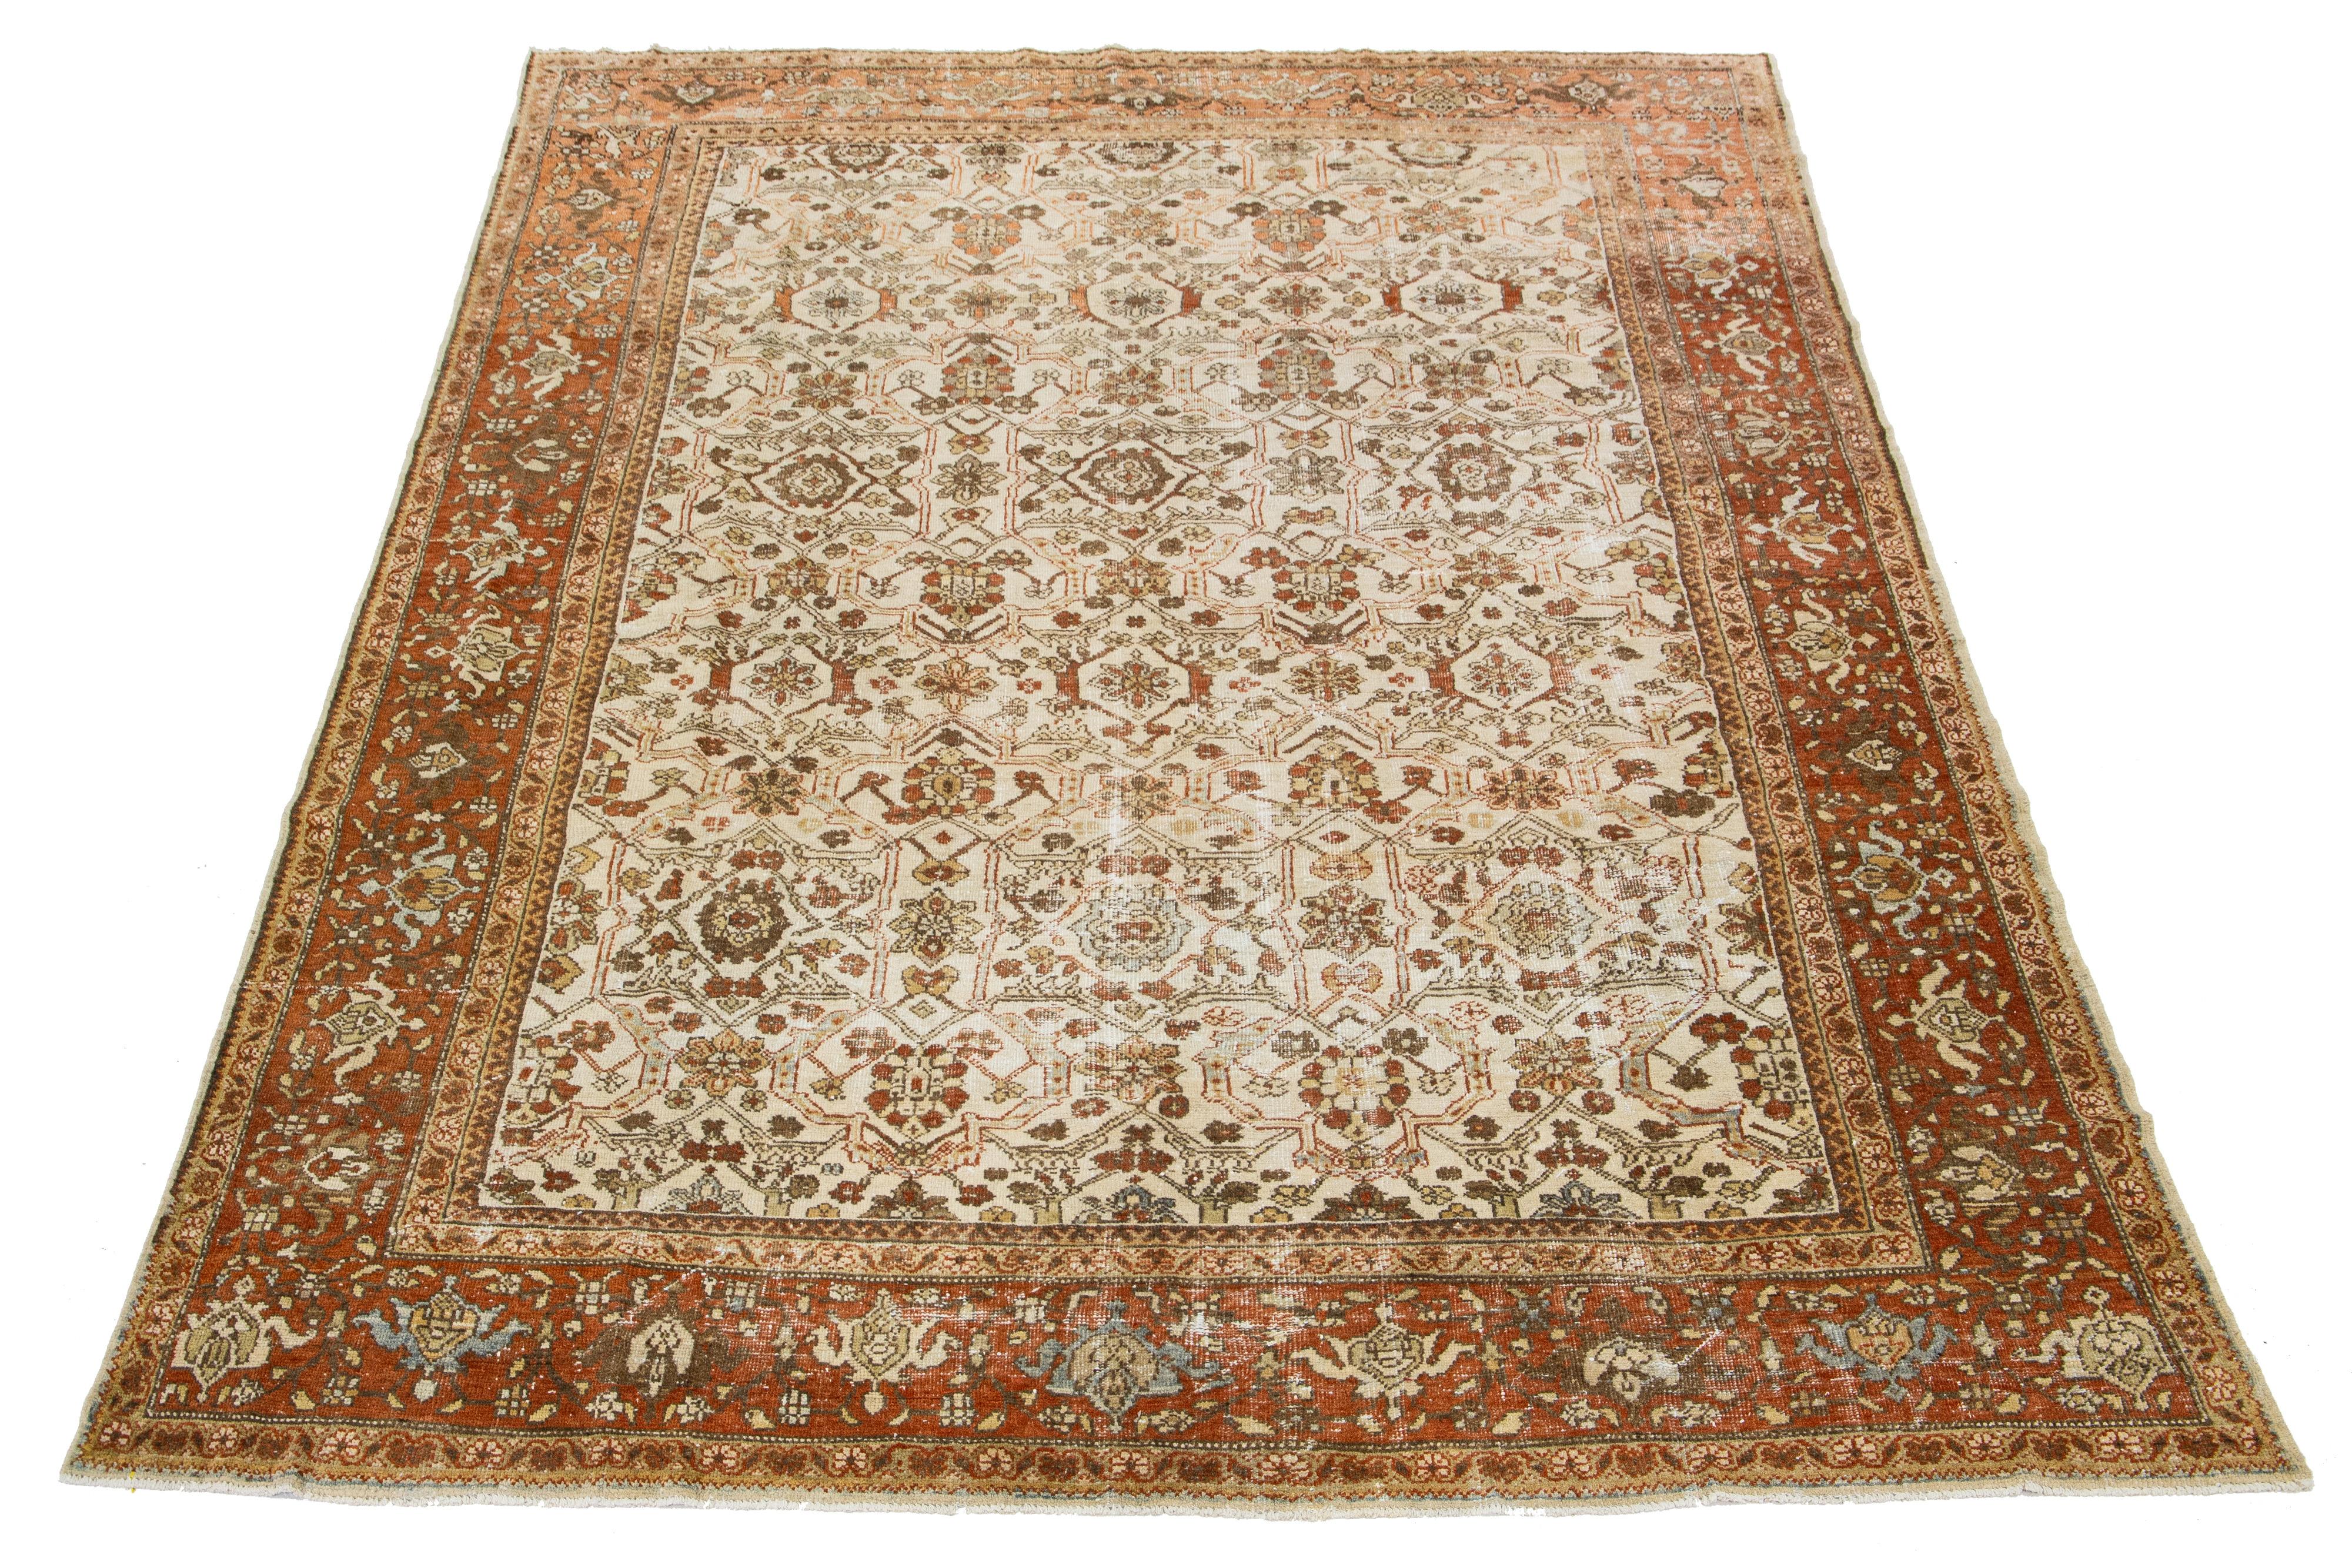 Beautiful Vintage Mahal hand-knotted wool rug with a beige color field. This Persian rug has a Classic rust and brown allover floral design.

This rug measures 8'7